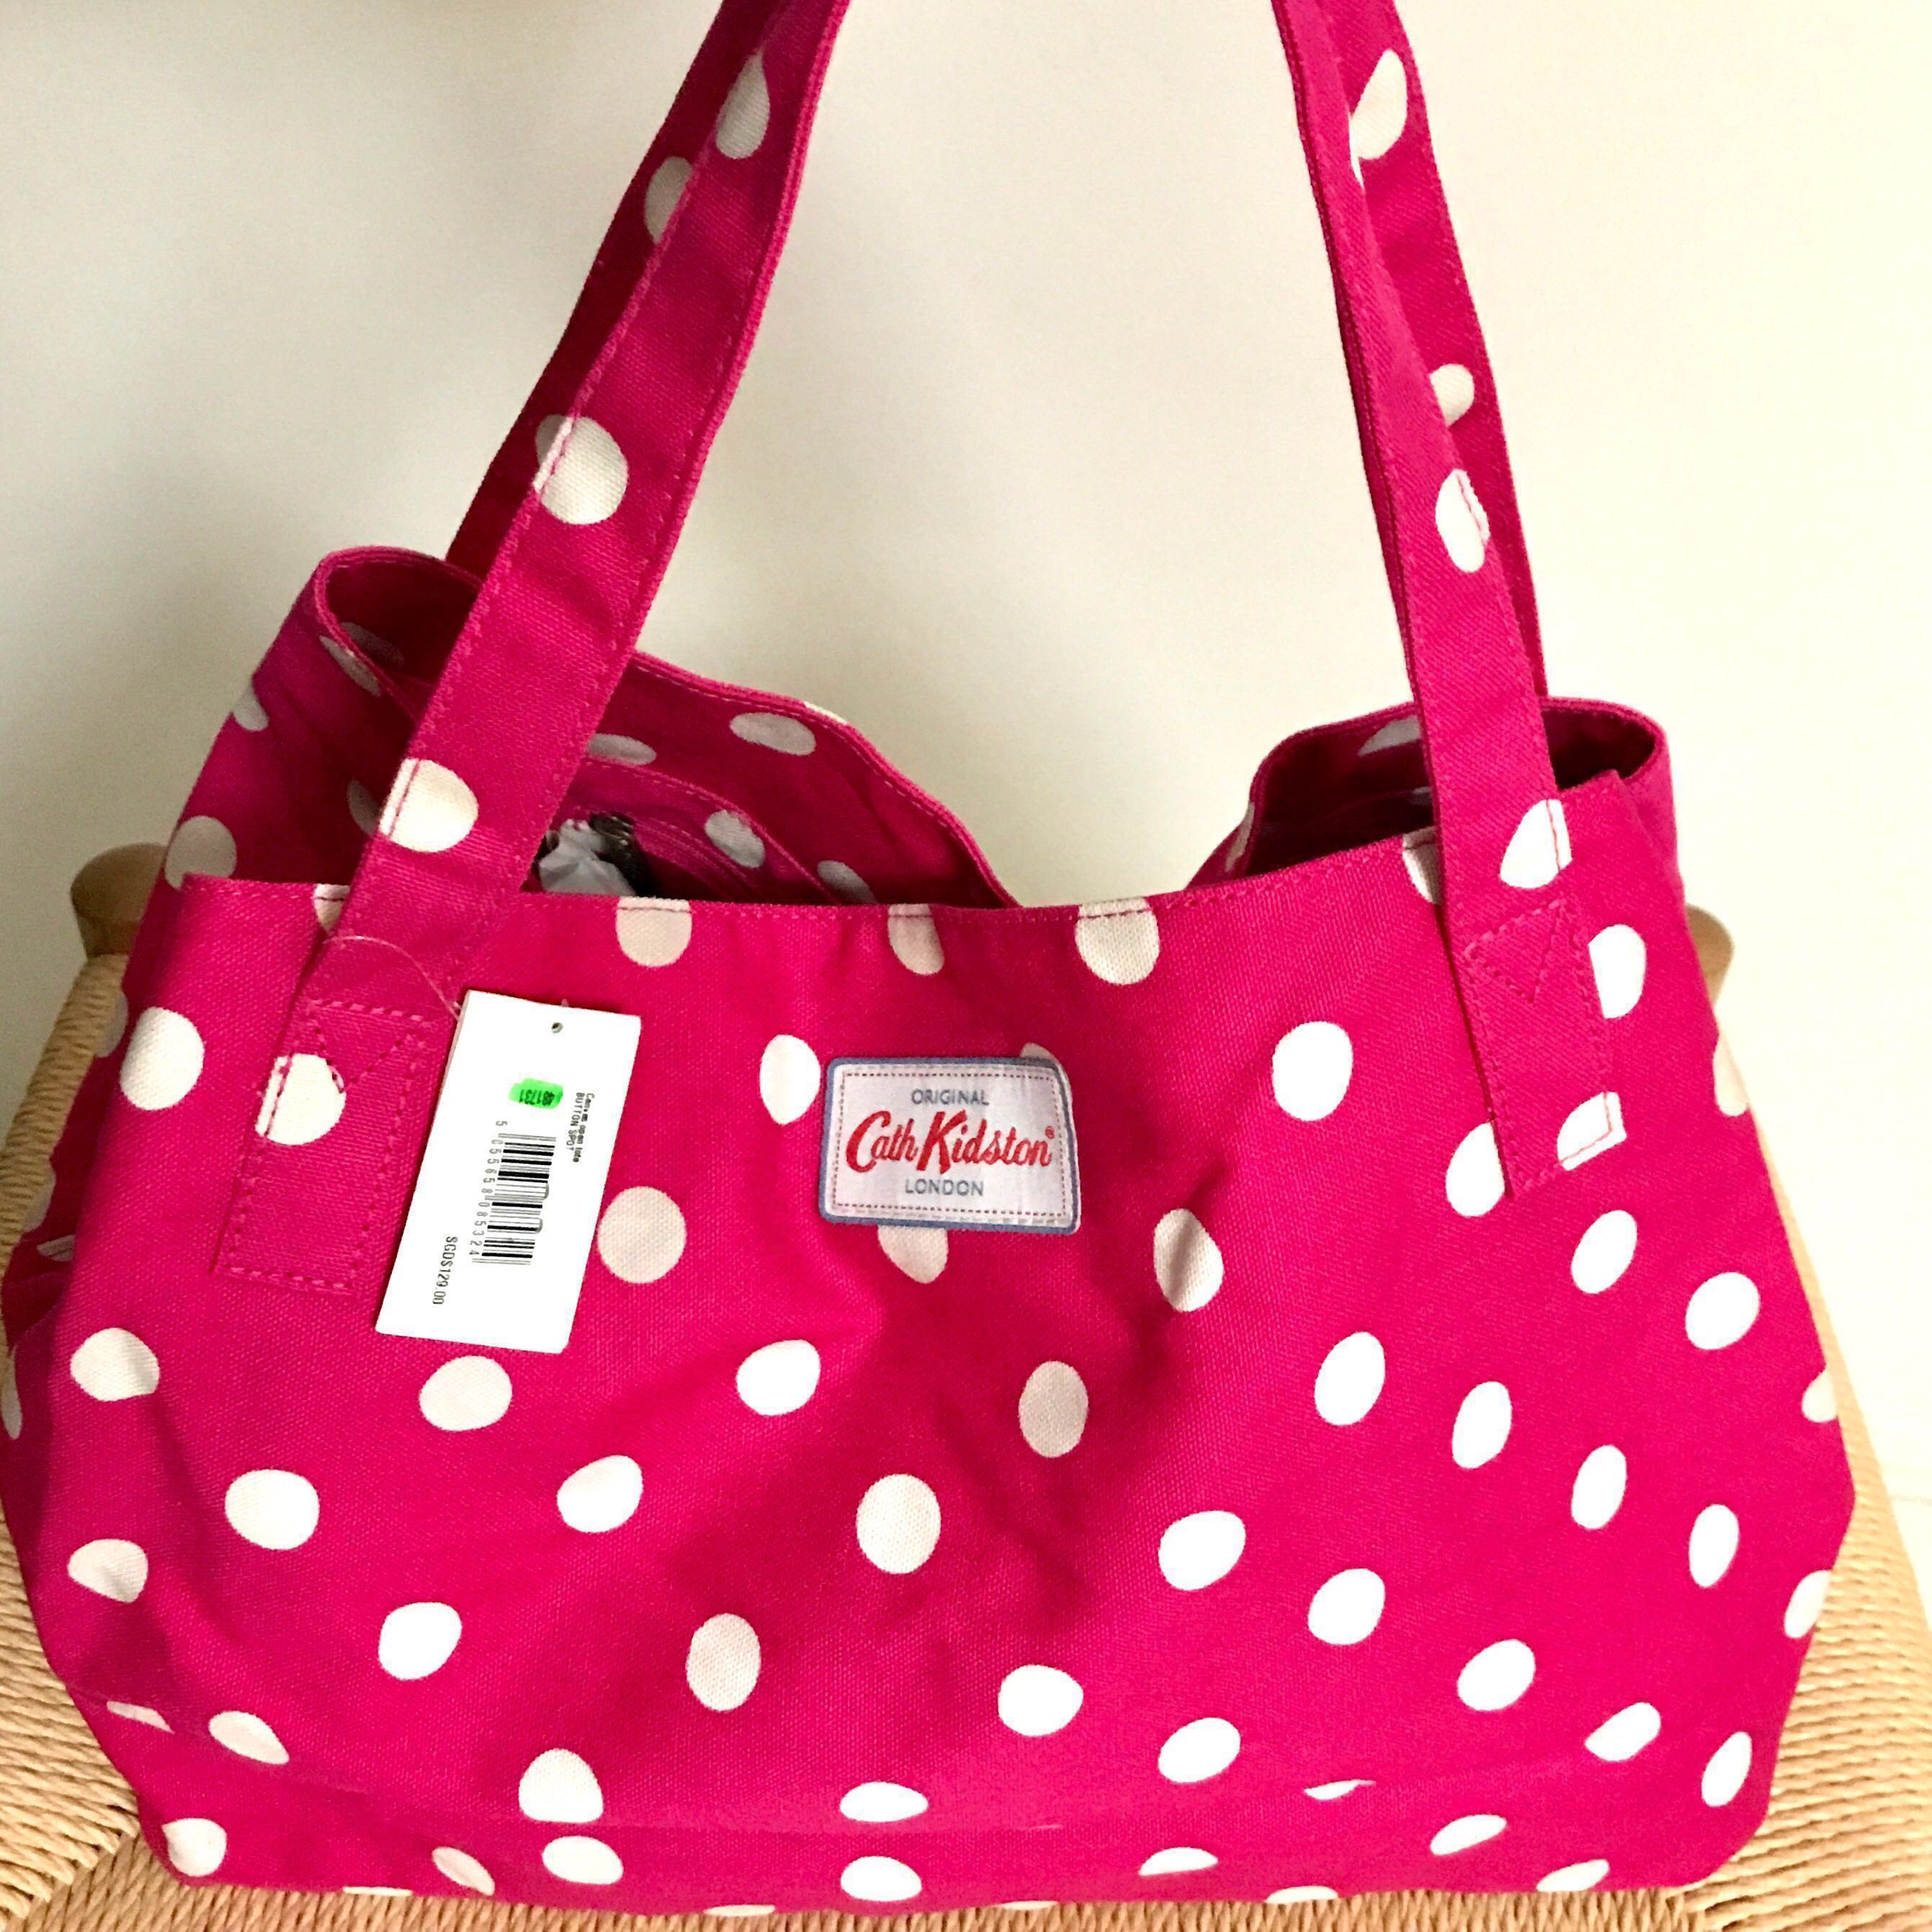 Cath Kidston Canvas Open Tote (Pink 